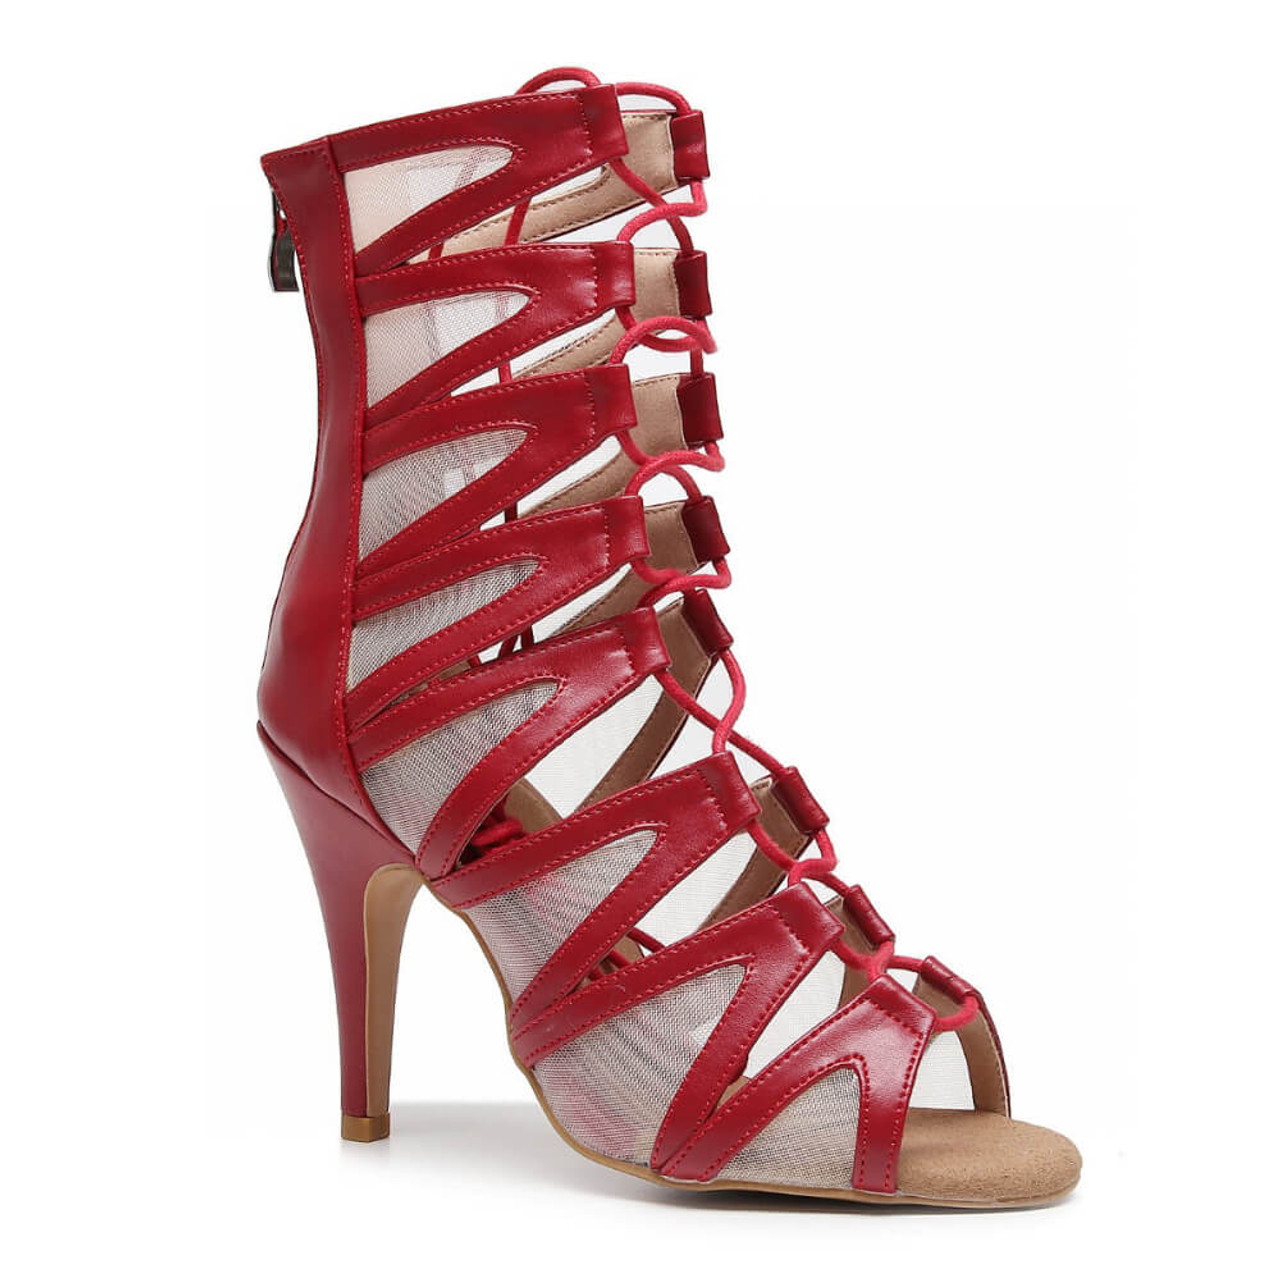 Vikky - Red, 3.5 or 4 inch Stiletto Heel, Strappy Mesh Cut Out Lace Up  Ankle Boot - Burju Shoes